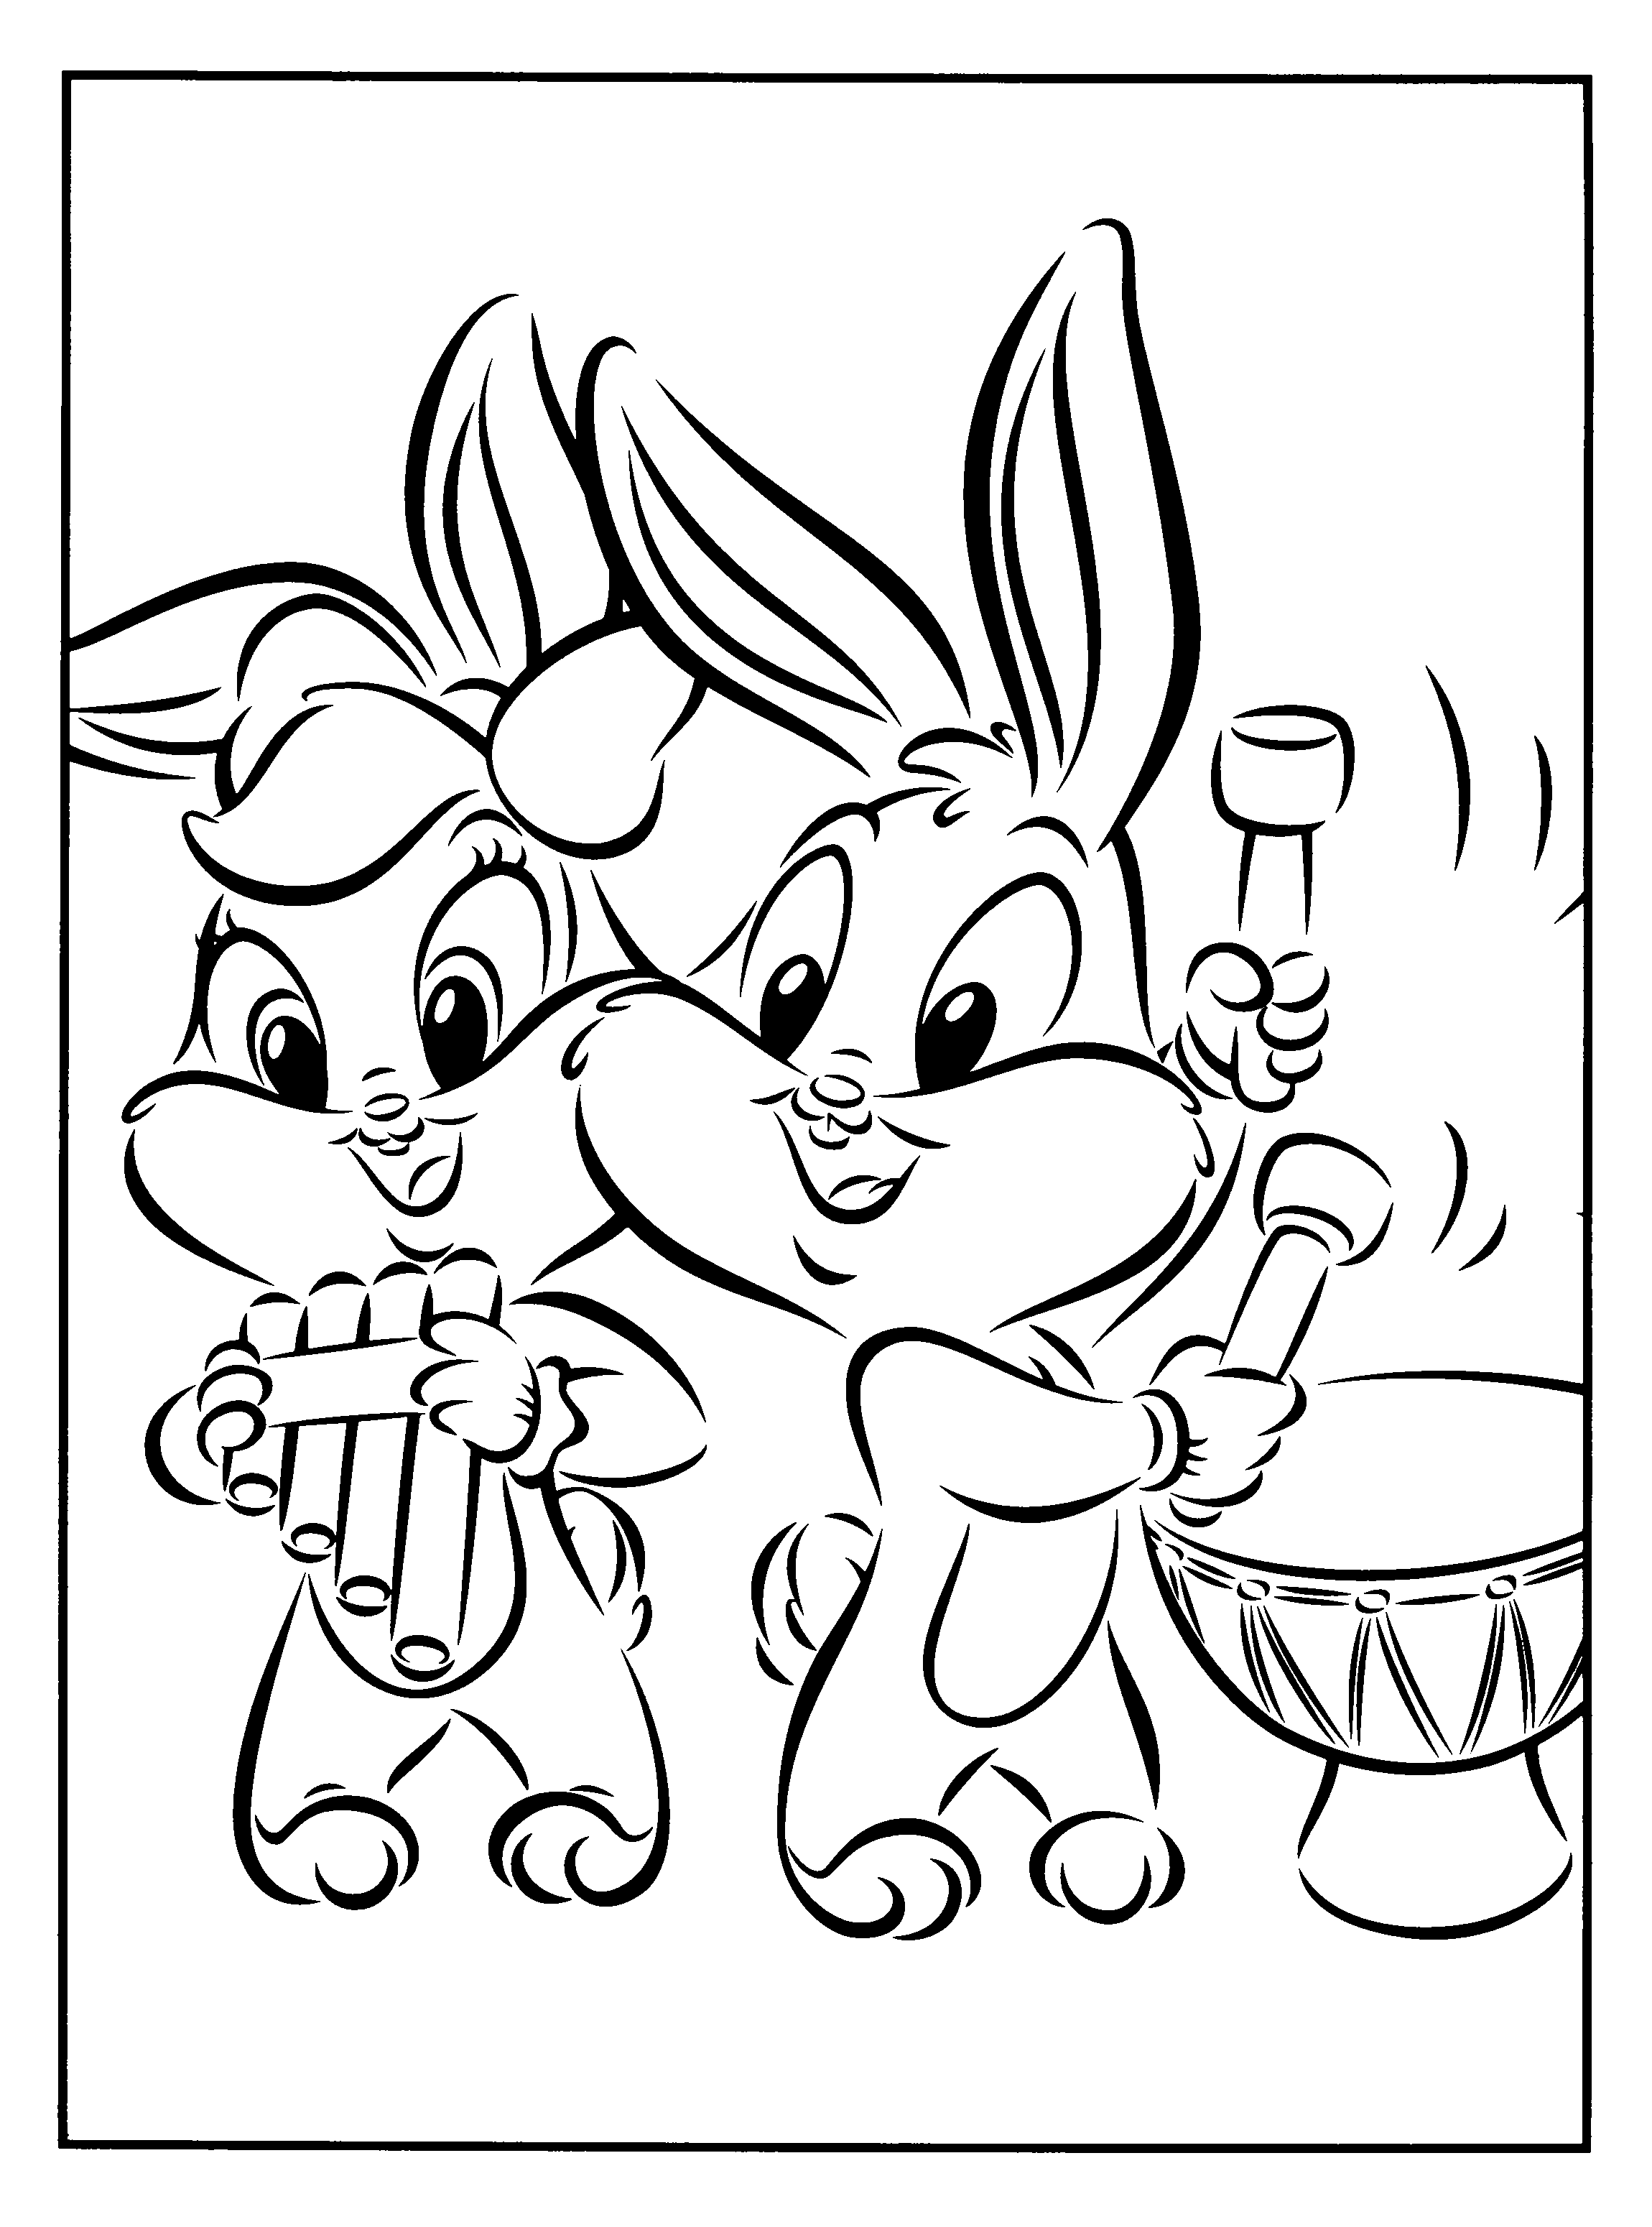 animated-coloring-pages-looney-tunes-image-0013